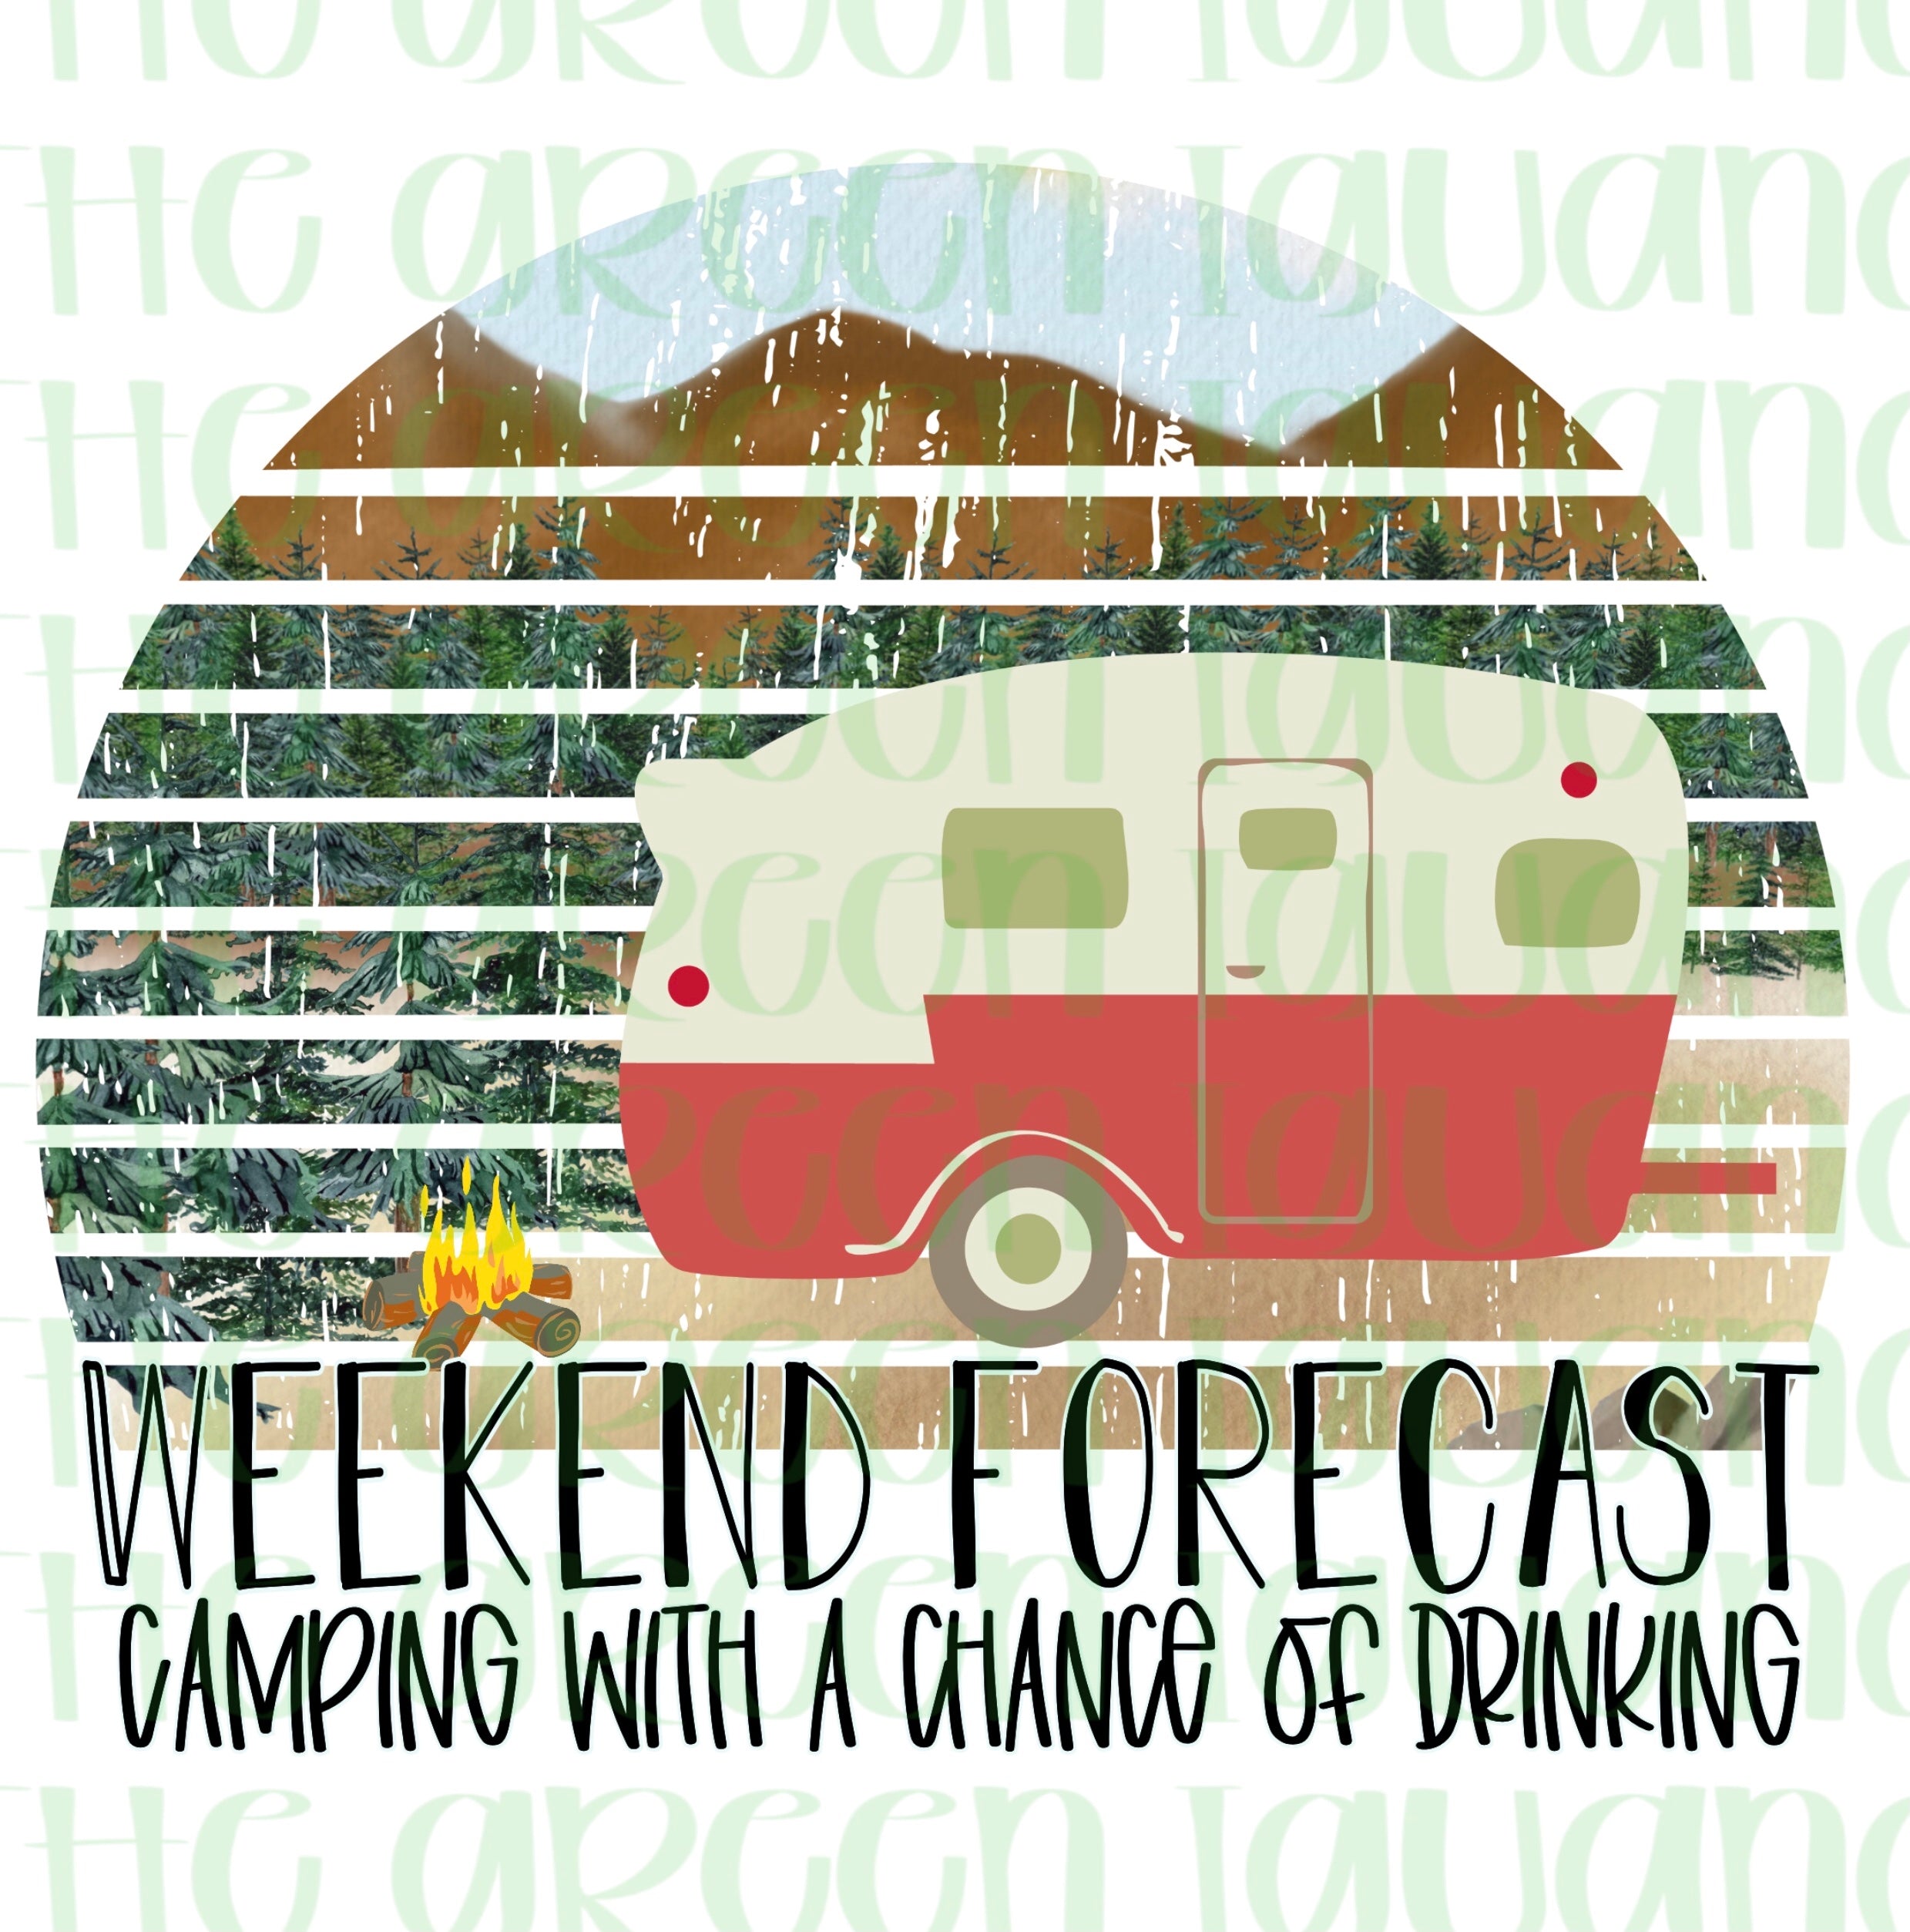 Weekend forecast: camping with a chance of drinking - DIGITAL